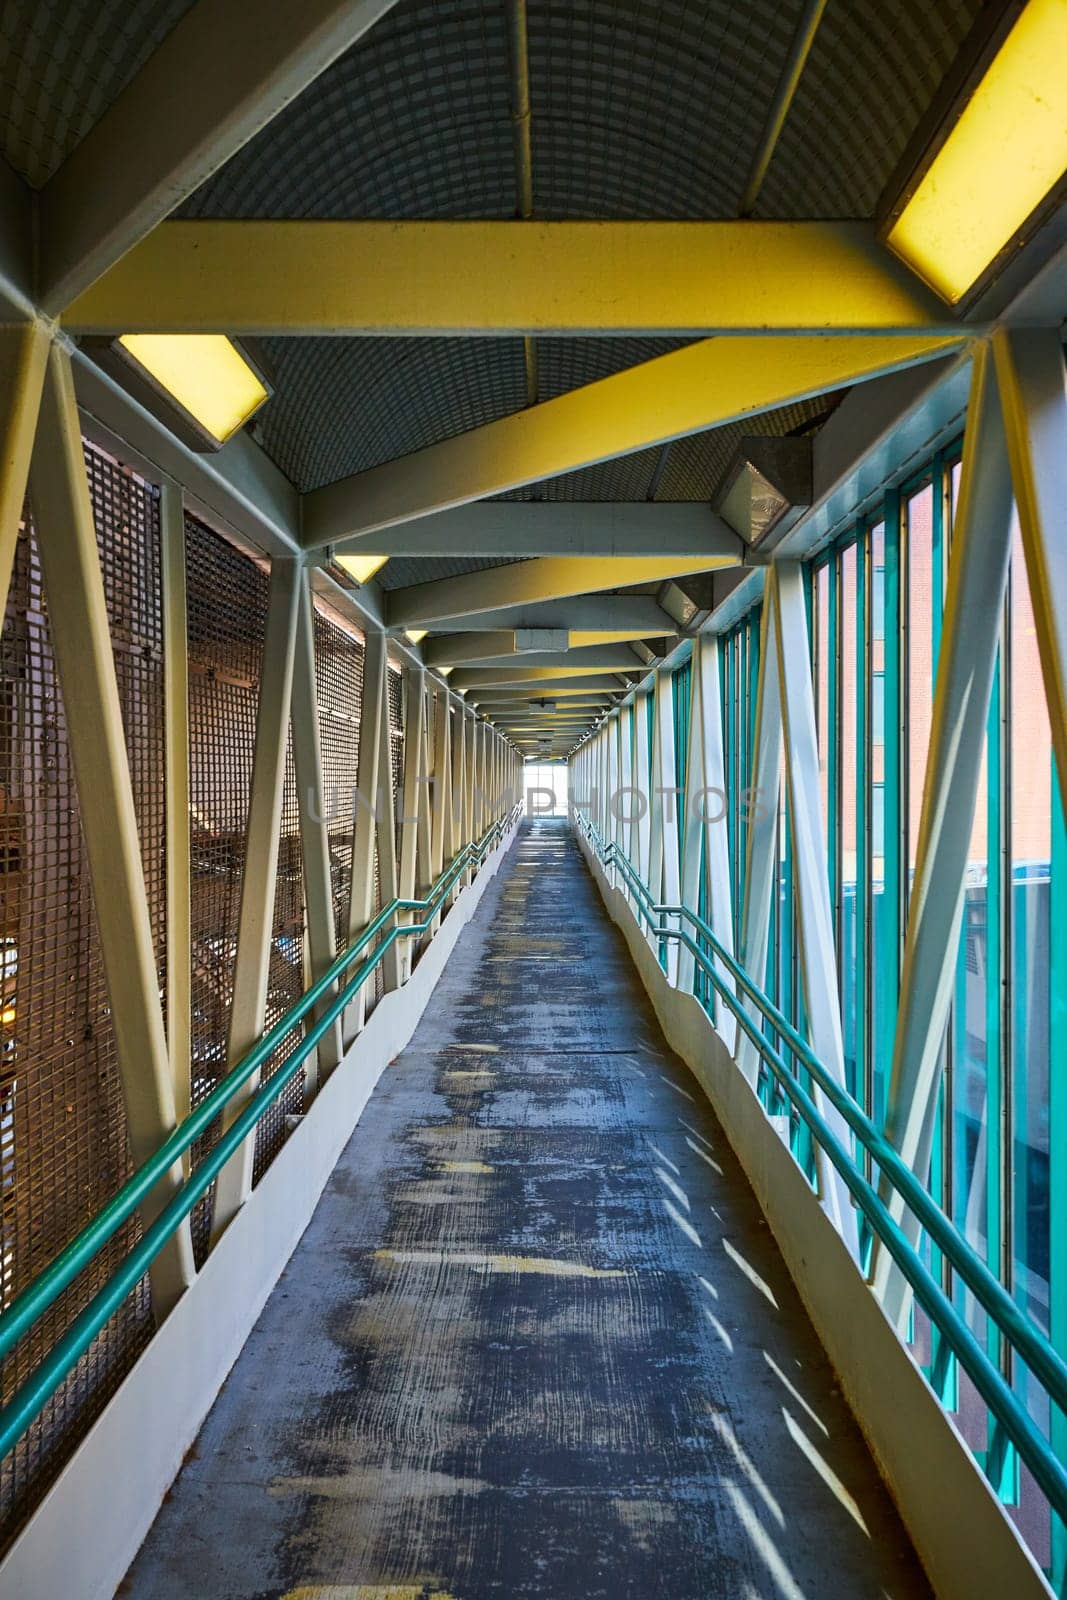 Enclosed Pedestrian Walkway with Yellow Lighting, Chicago by njproductions